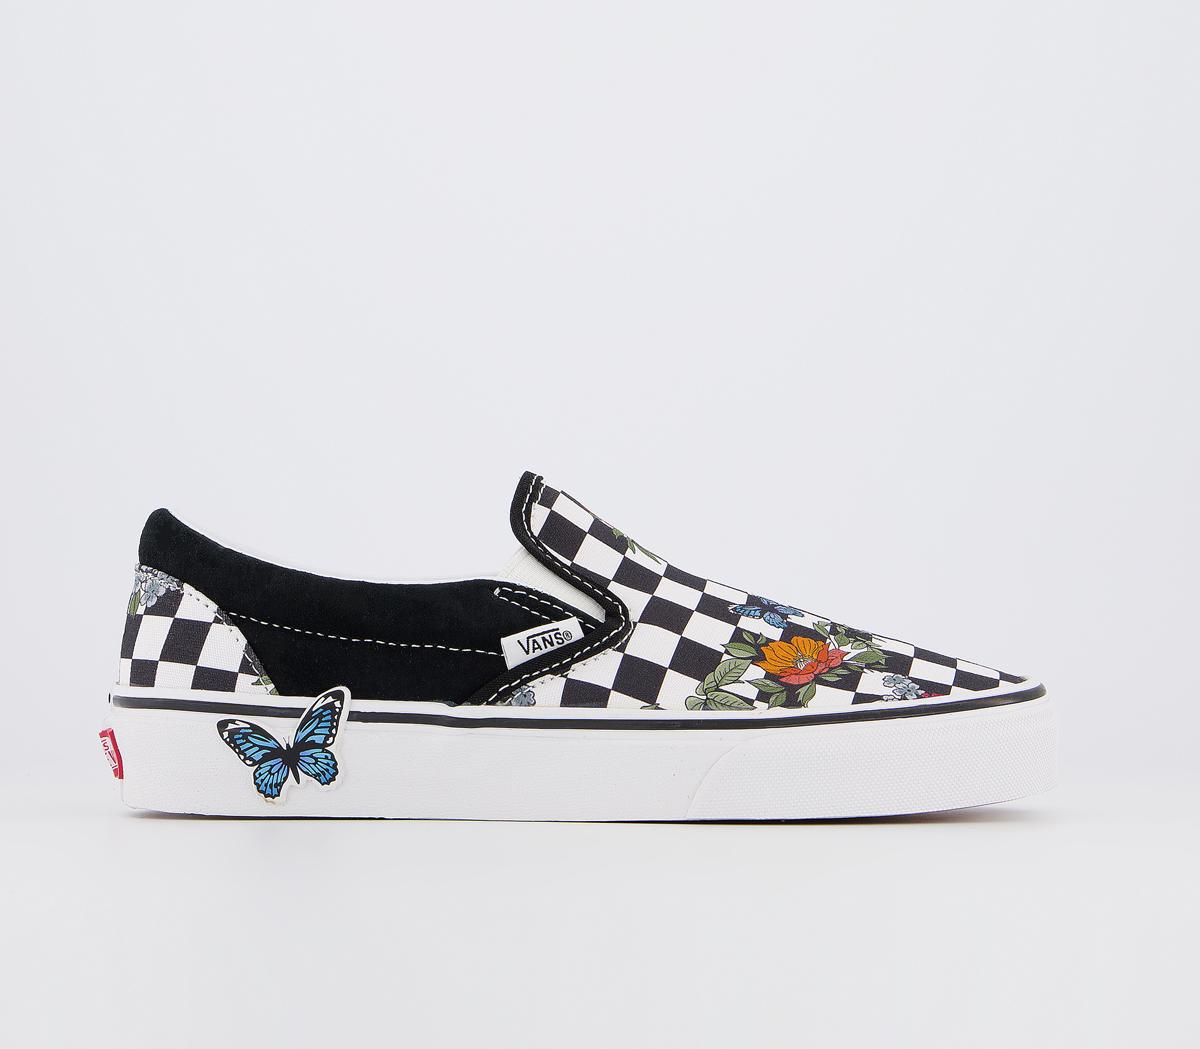 Australsk person nuance sig selv Vans Vans Classic Slip On Traines Black True White Floral Checkerboard  Exclusive - Hers trainers